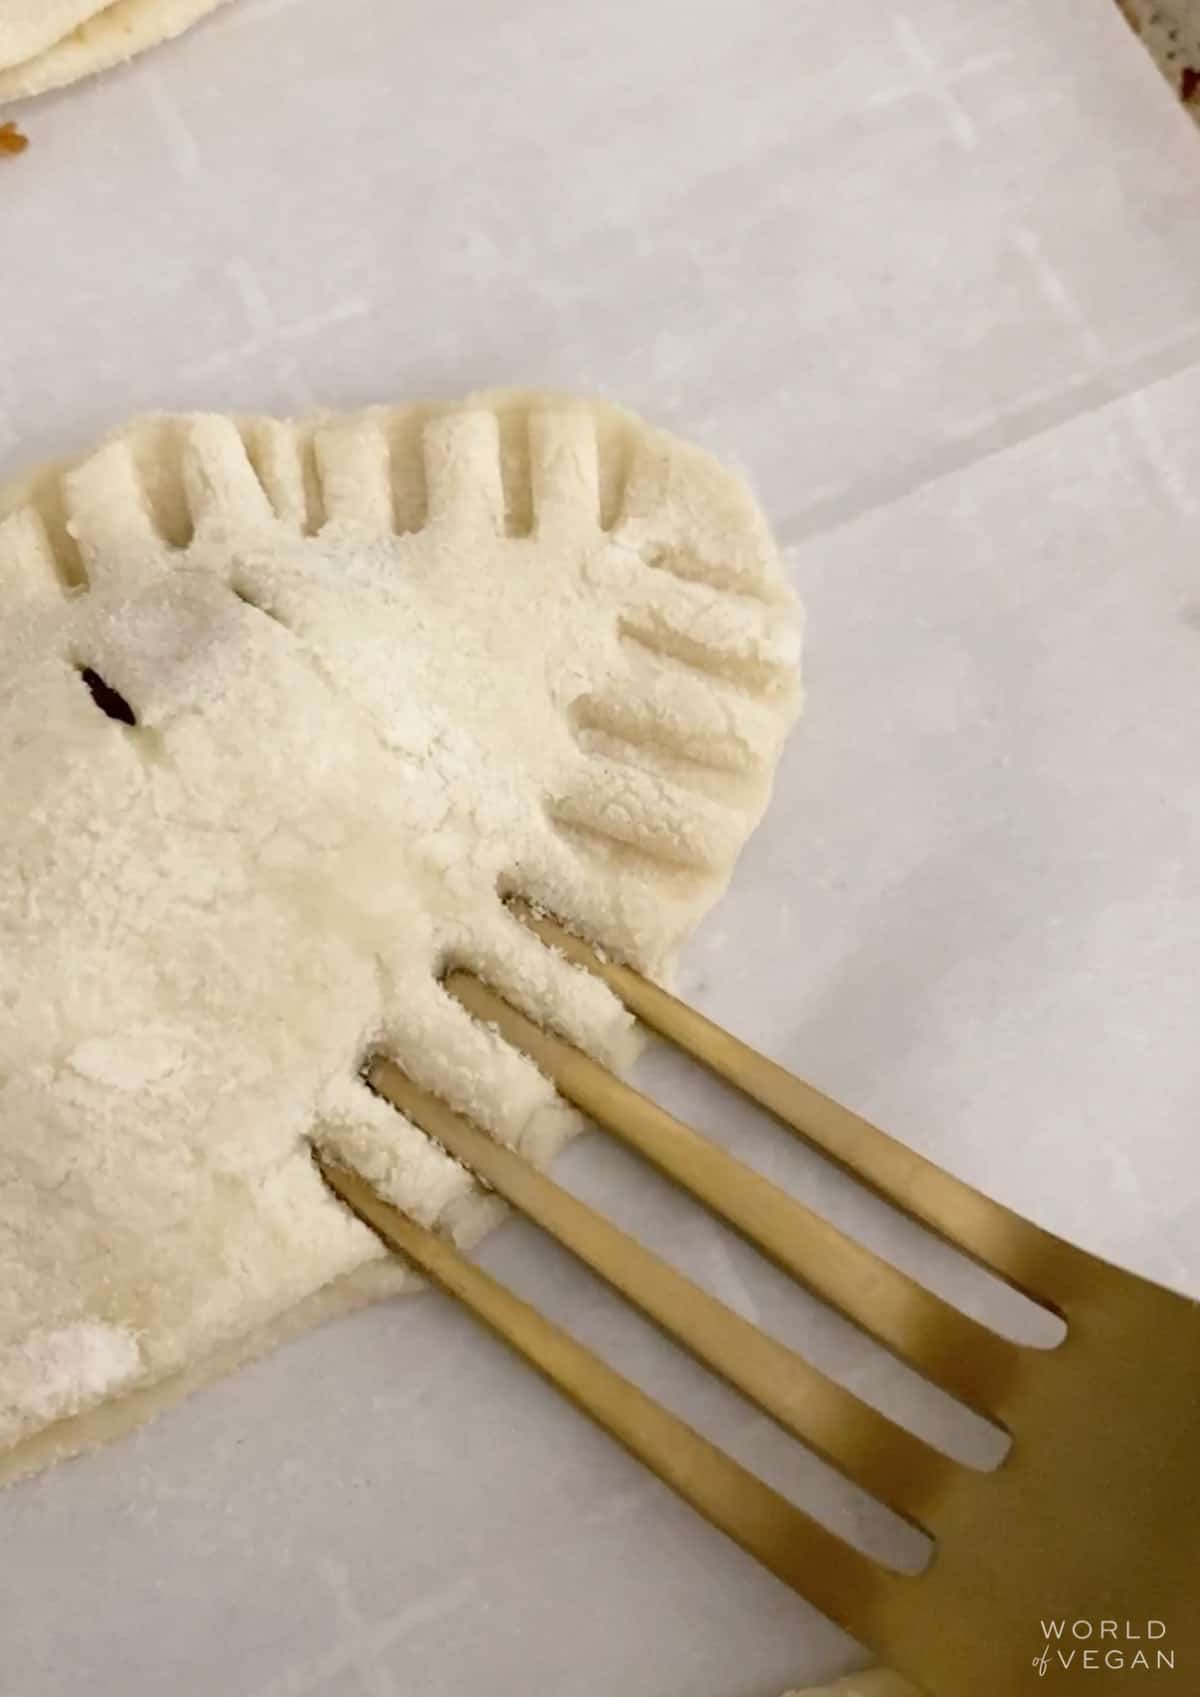 Pressing dough together with a gold fork.